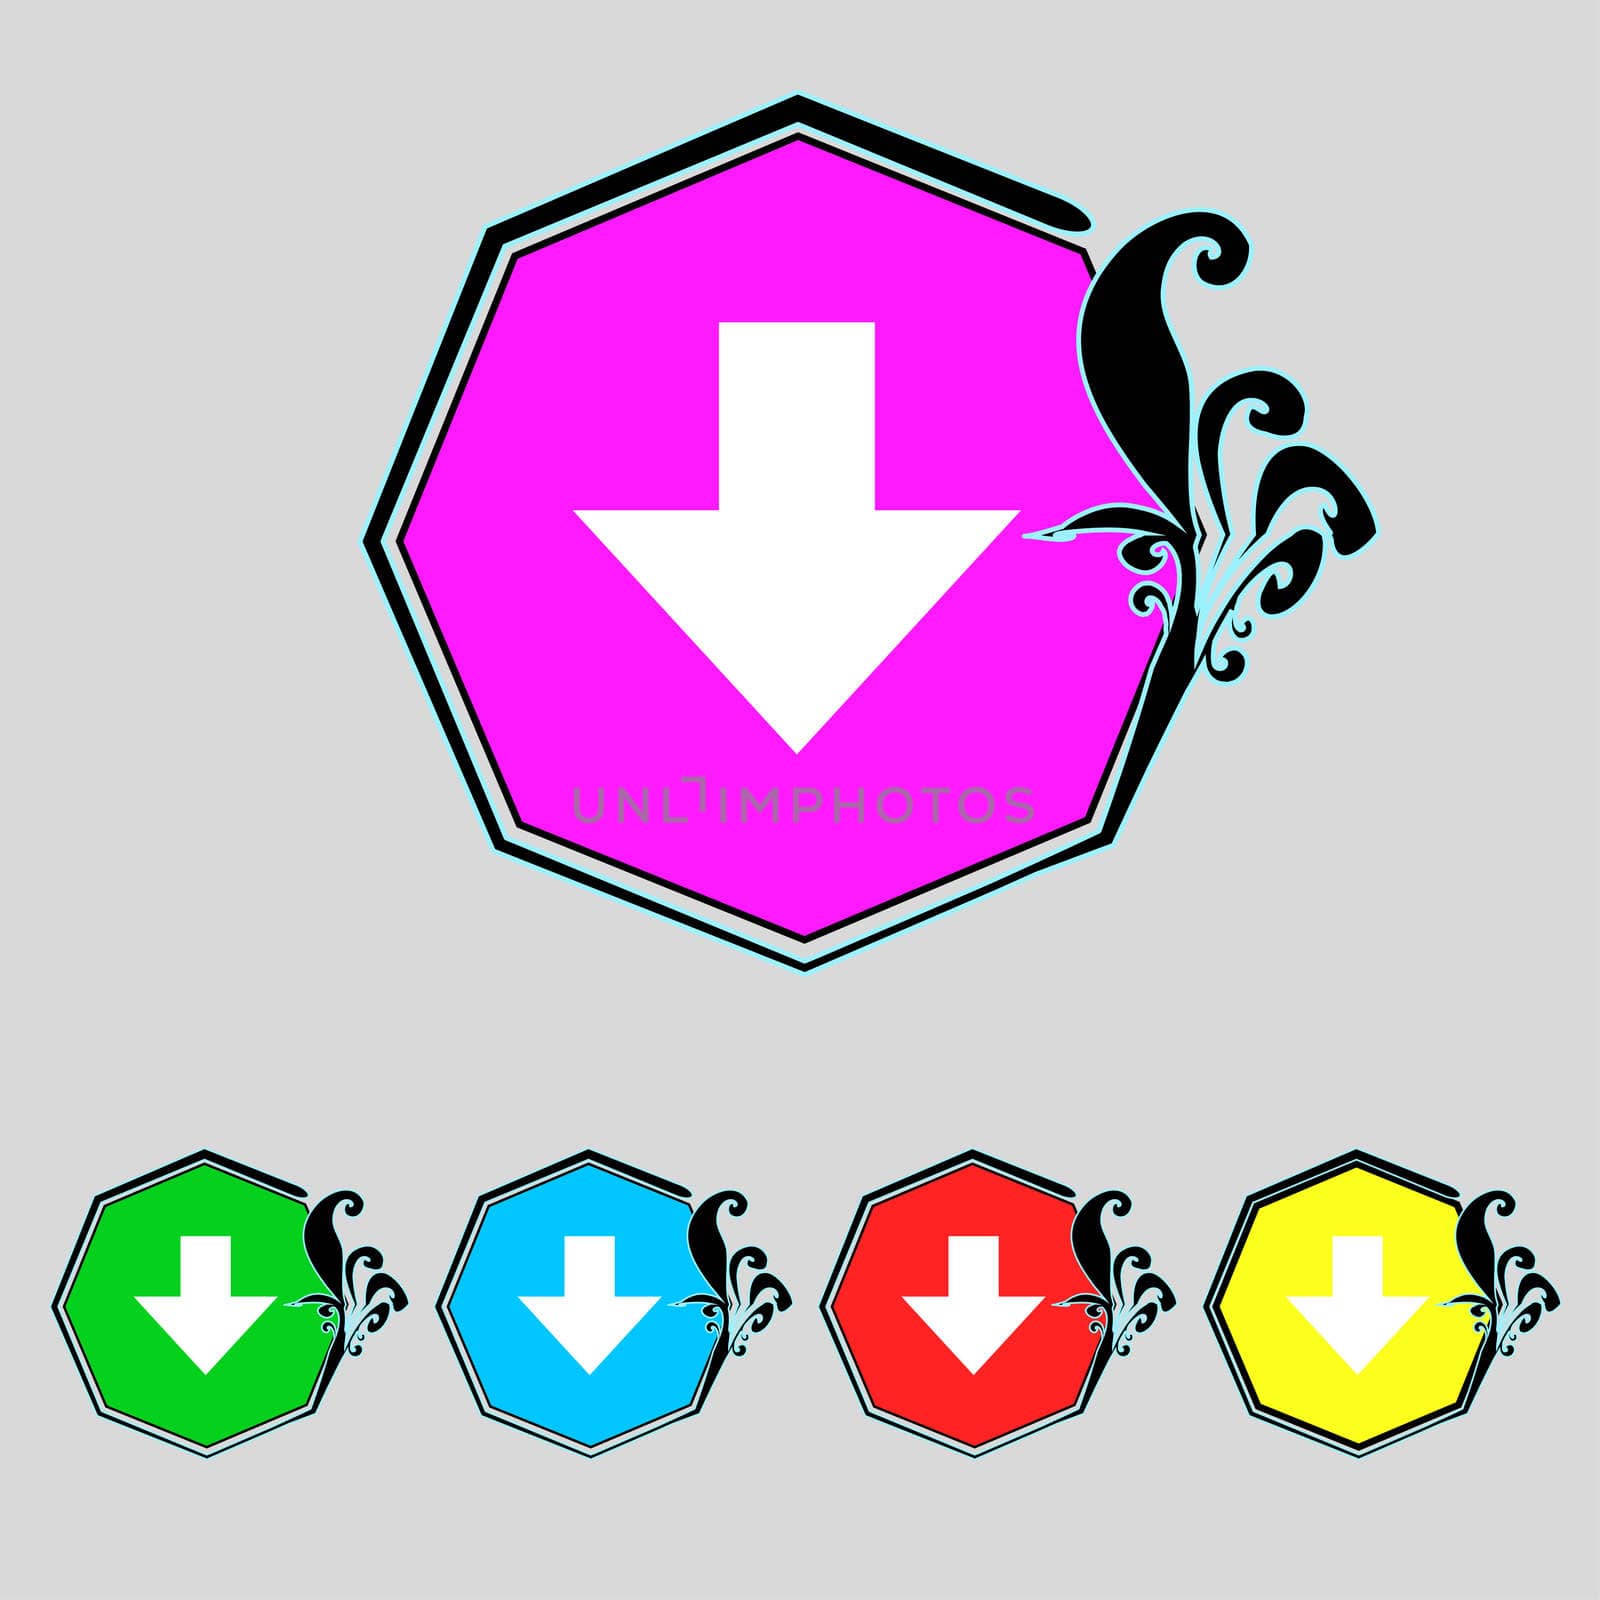 Download sign. Downloading flat icon. Load label. Set colourful buttons illustration